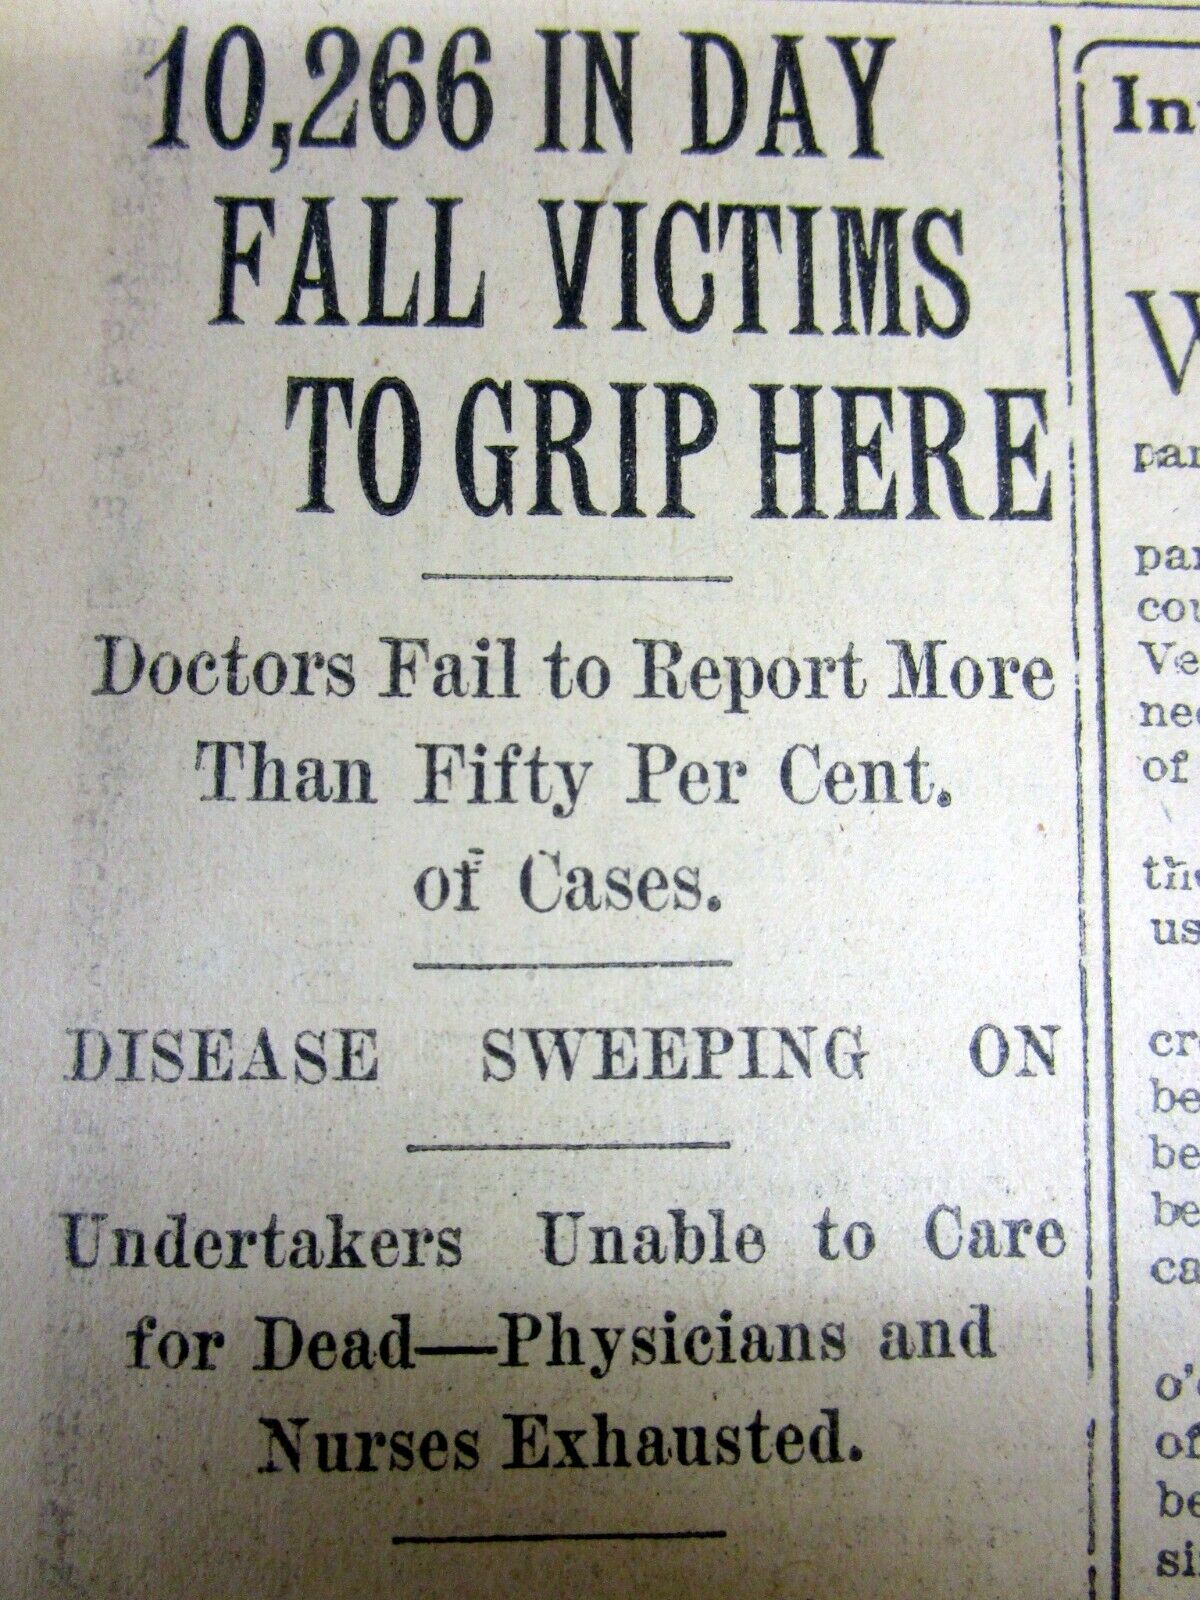 1918 newspaper THE GREAT INFLUENZA PANDEMIC SPREADS WIDELY to the GENERAL PUBLIC